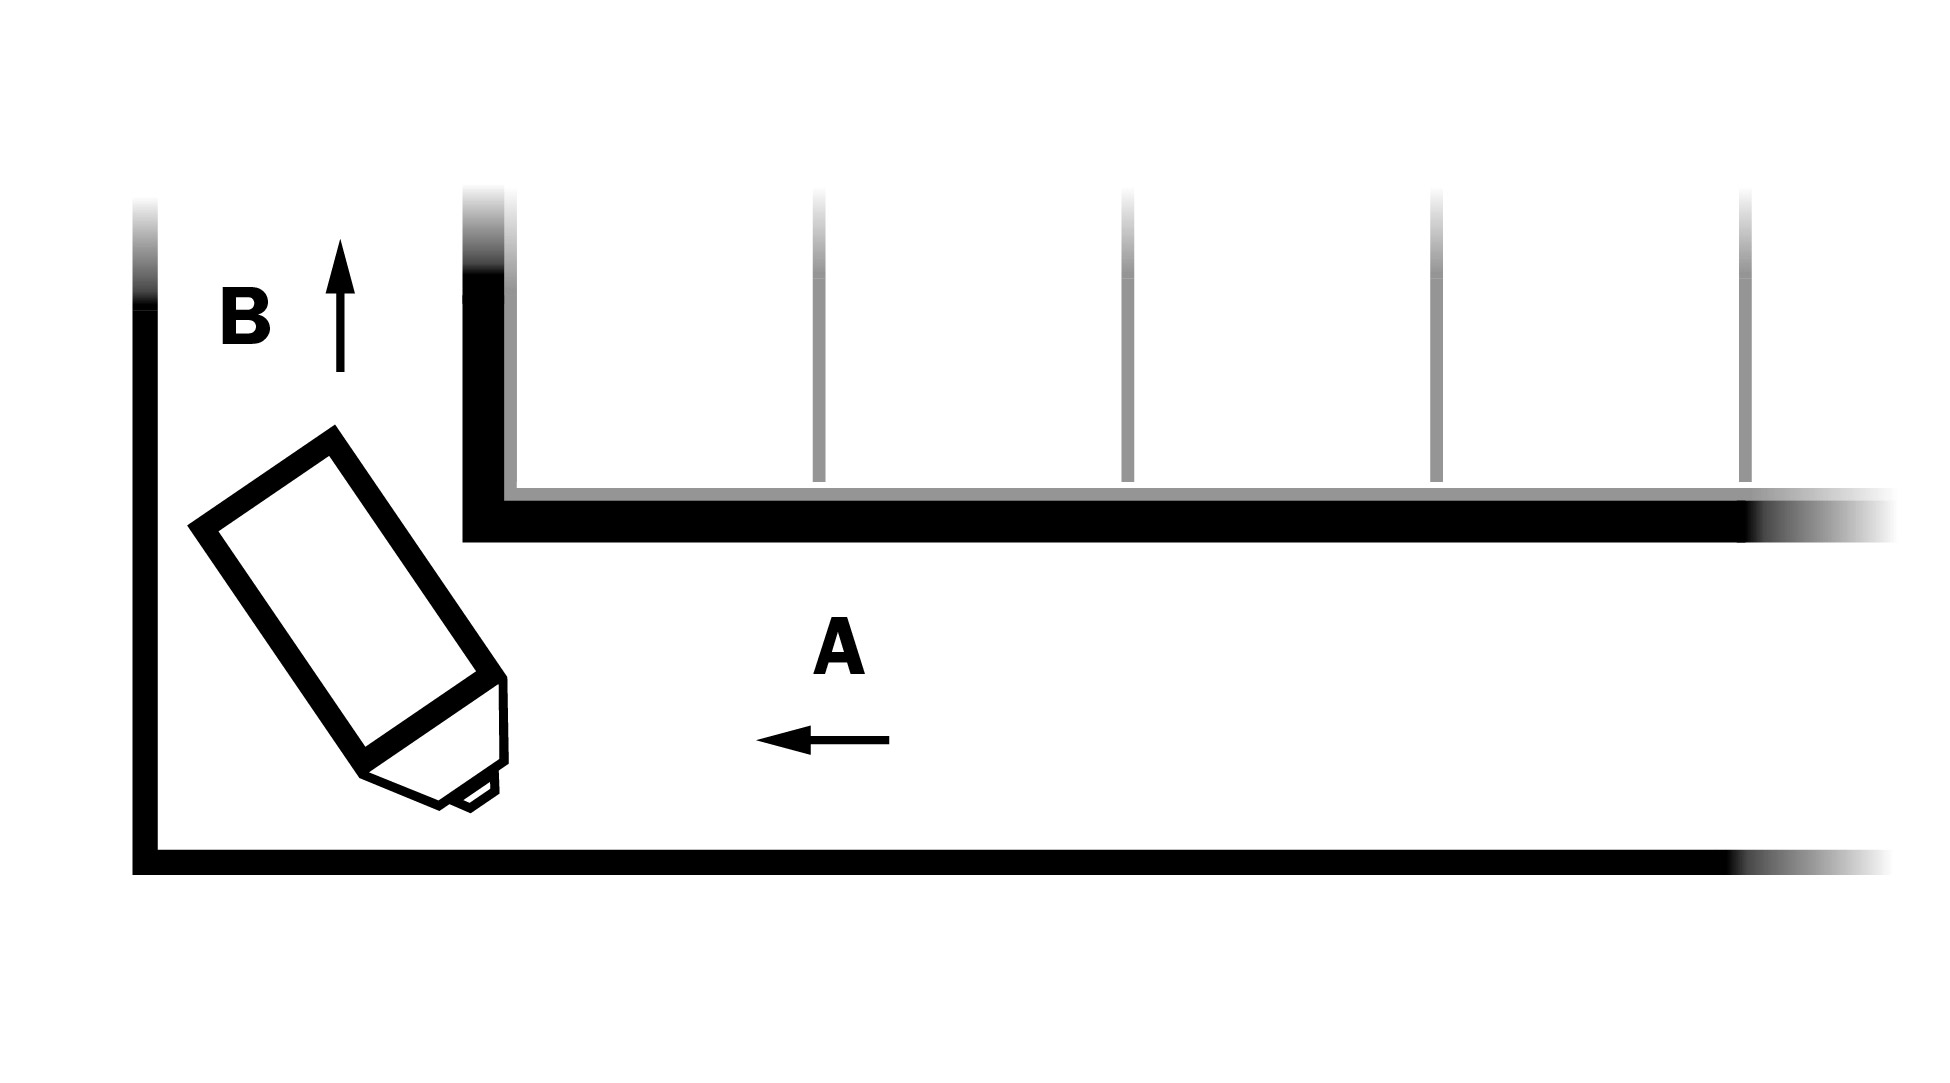 Graphic showing a barn alley way with an angled rectangular feed cart in bottom left corner with an arrow to the right of it pointing at the feed cart and a Capital A above the arrow. A capital letter B is located on the left side of the drawing above the feed cart with an arrow pointing upwards beside it.